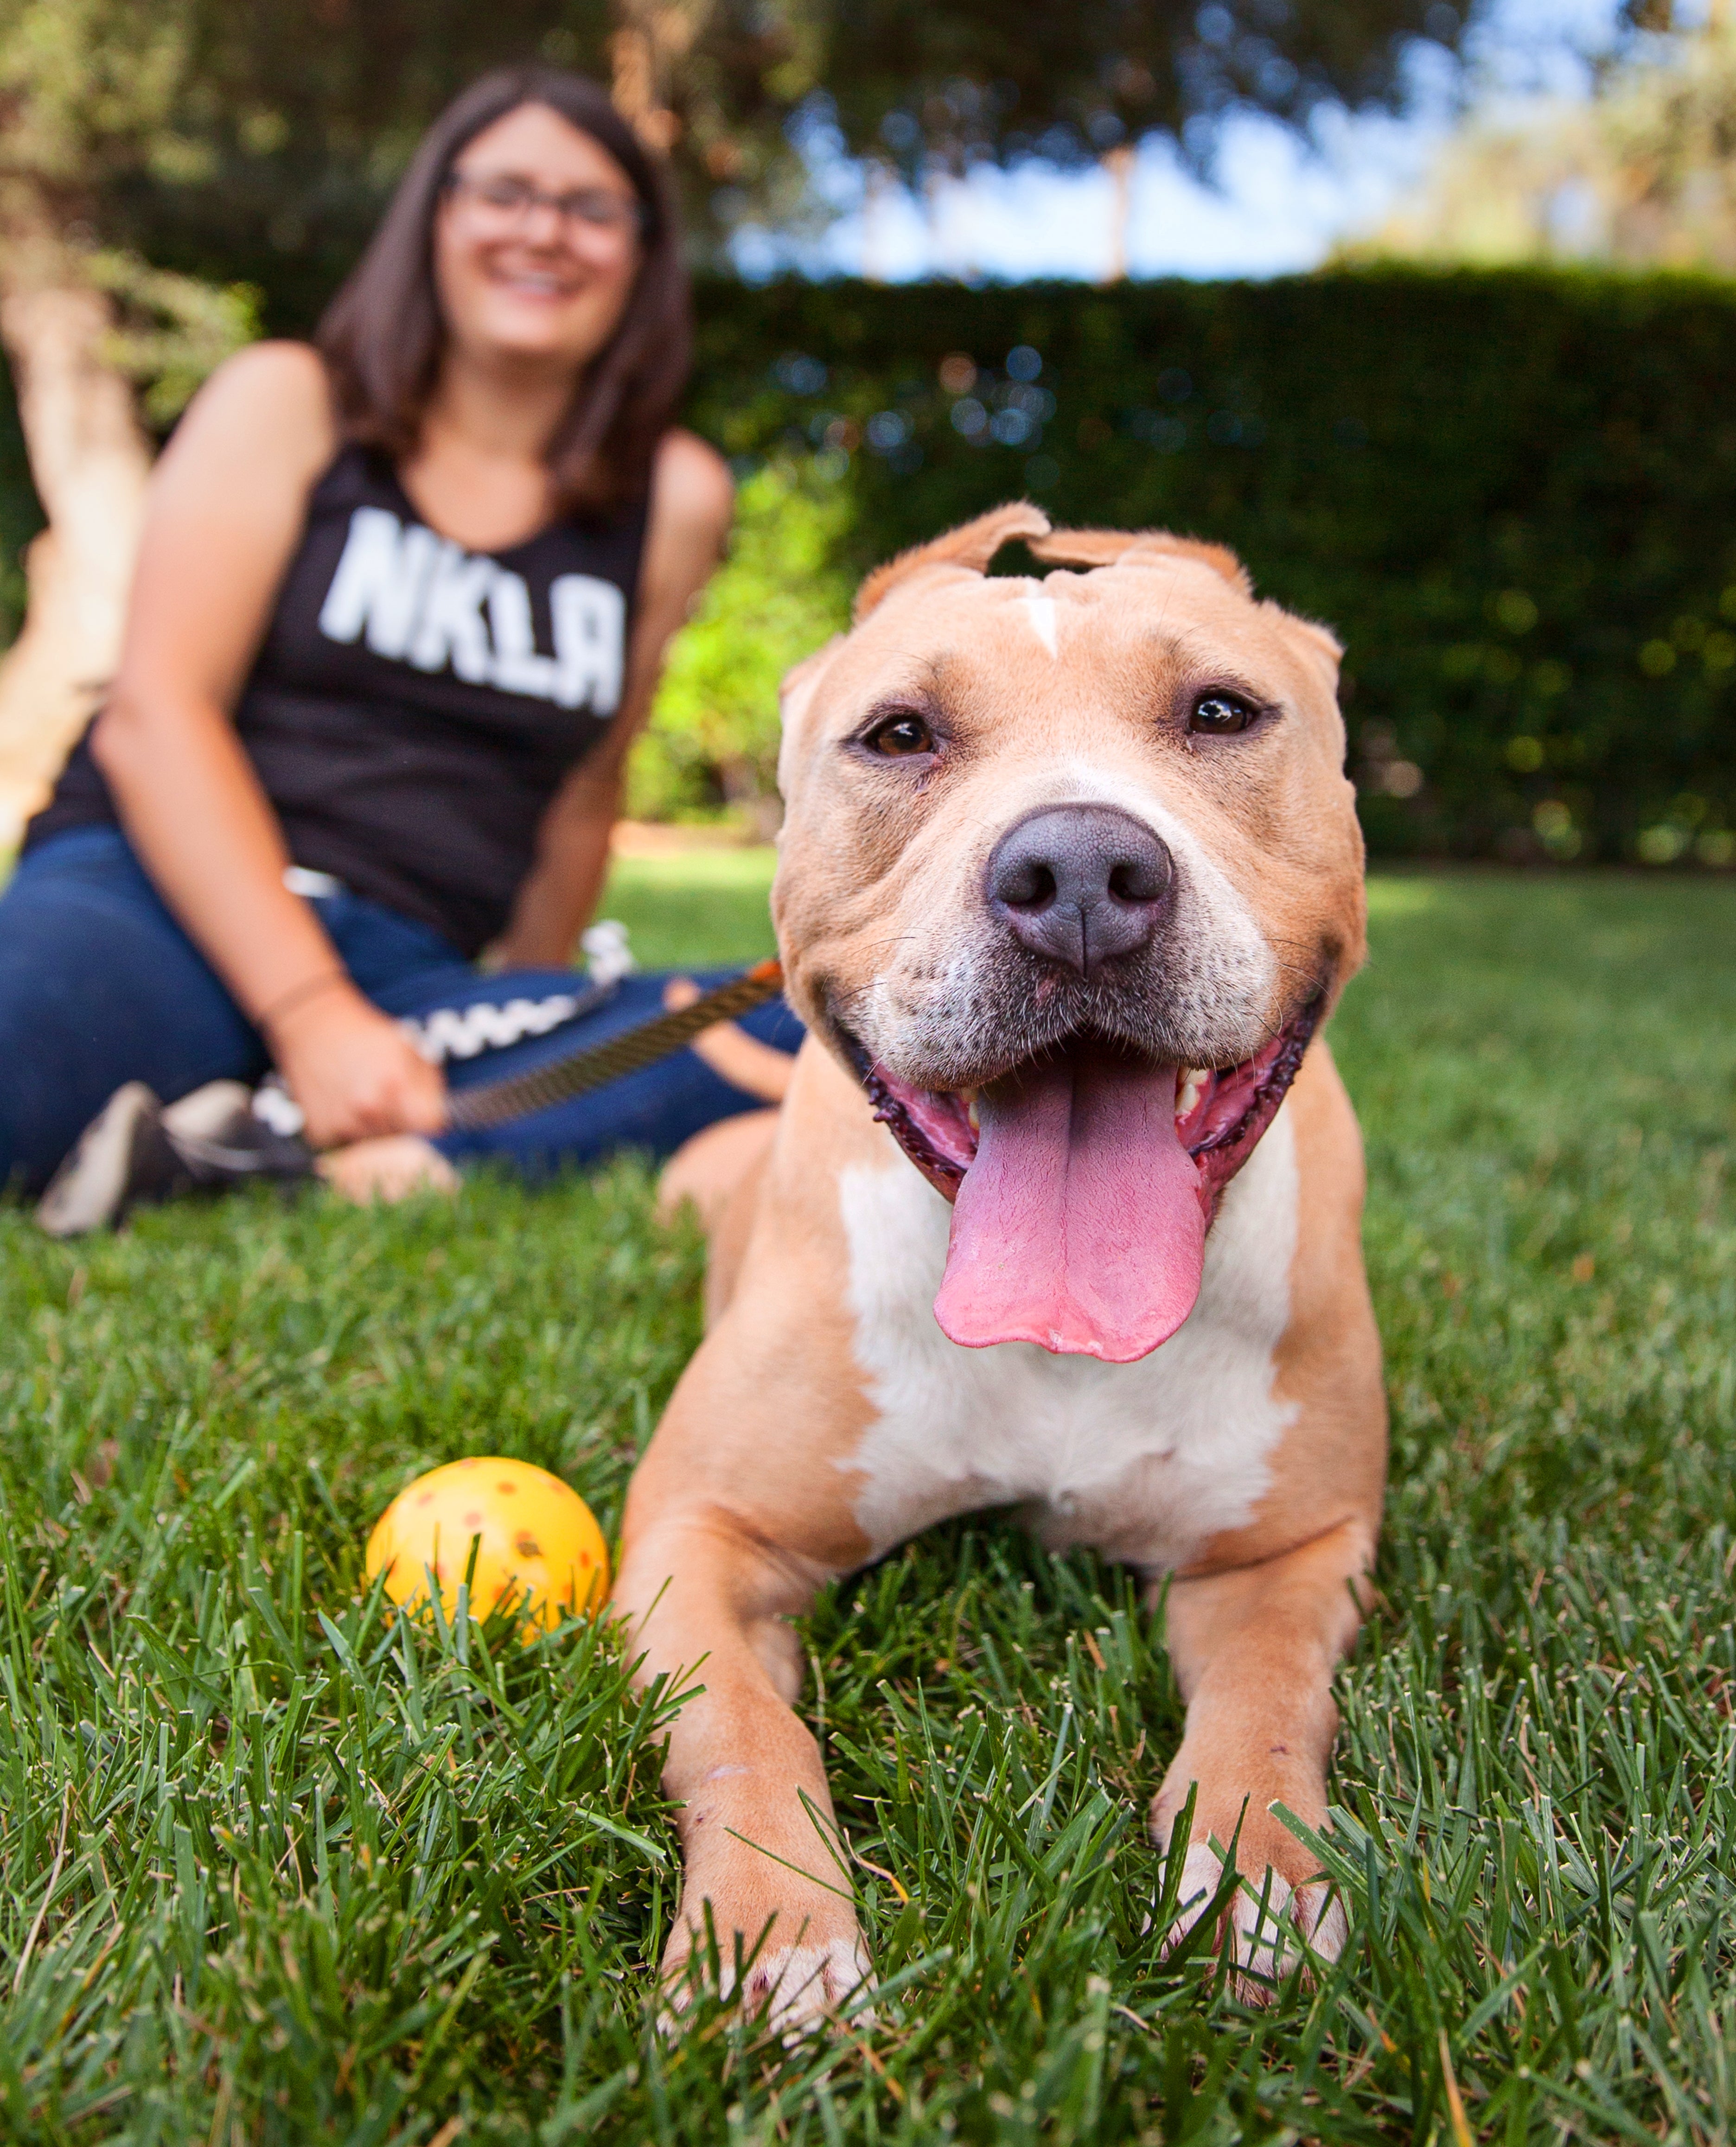 Person sitting with a happy dog in a grassy area playing with a ball